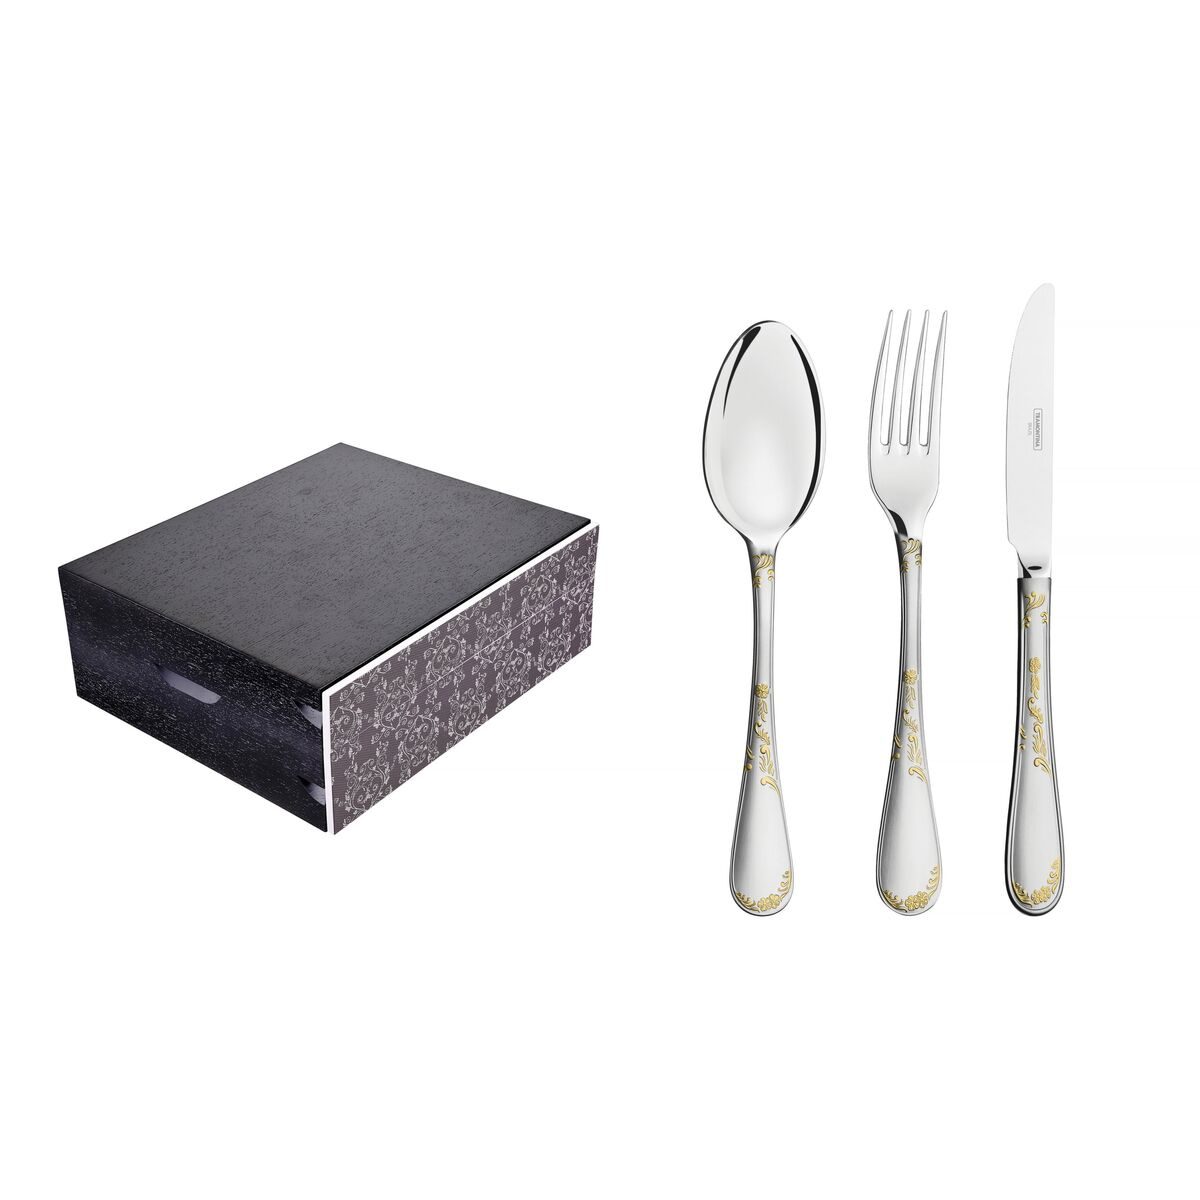 Tramontina Renascença stainless steel flatware set with table knives, gold detailing, mirror and matte finish and wood case, 130 pc set